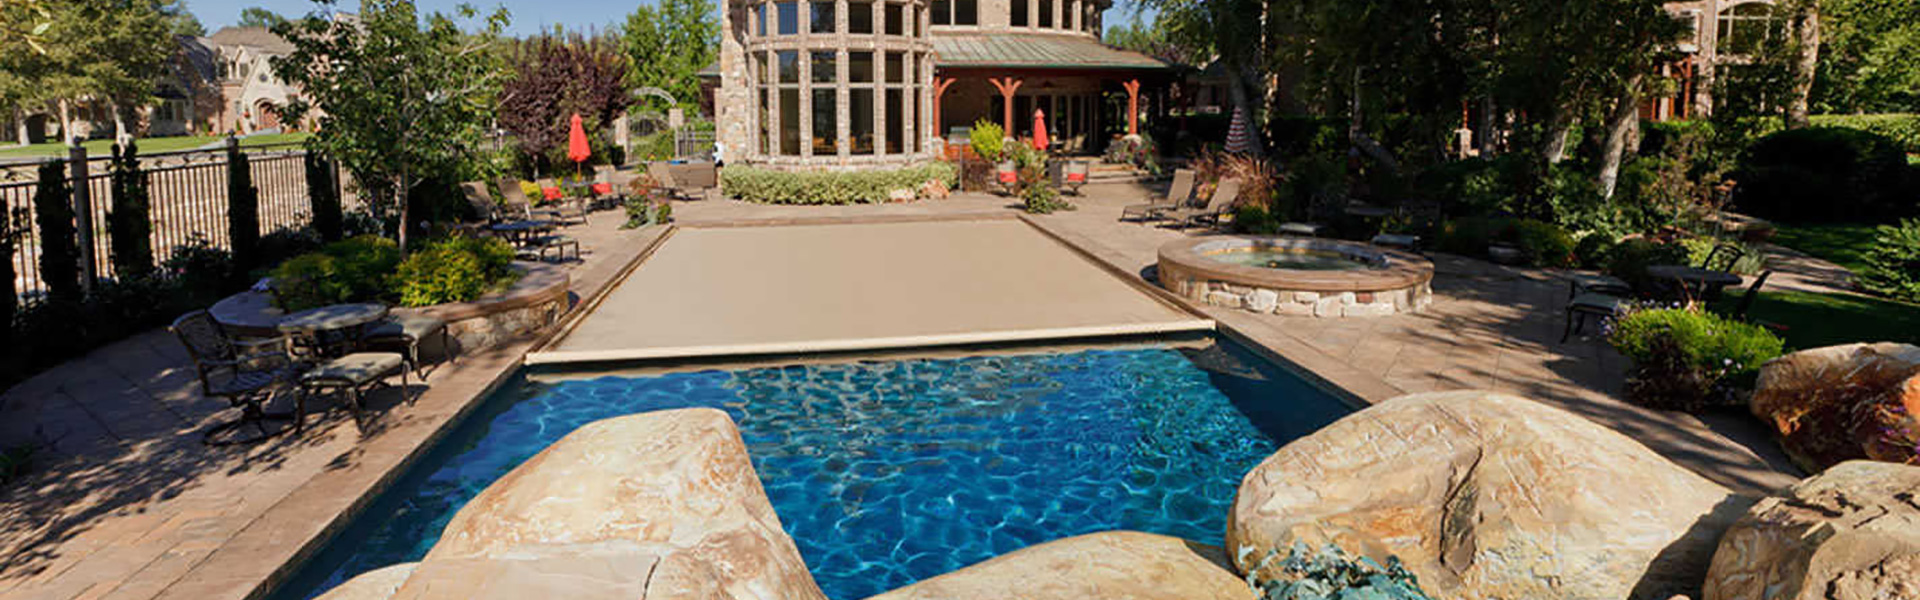 Coverstar Pool Covers